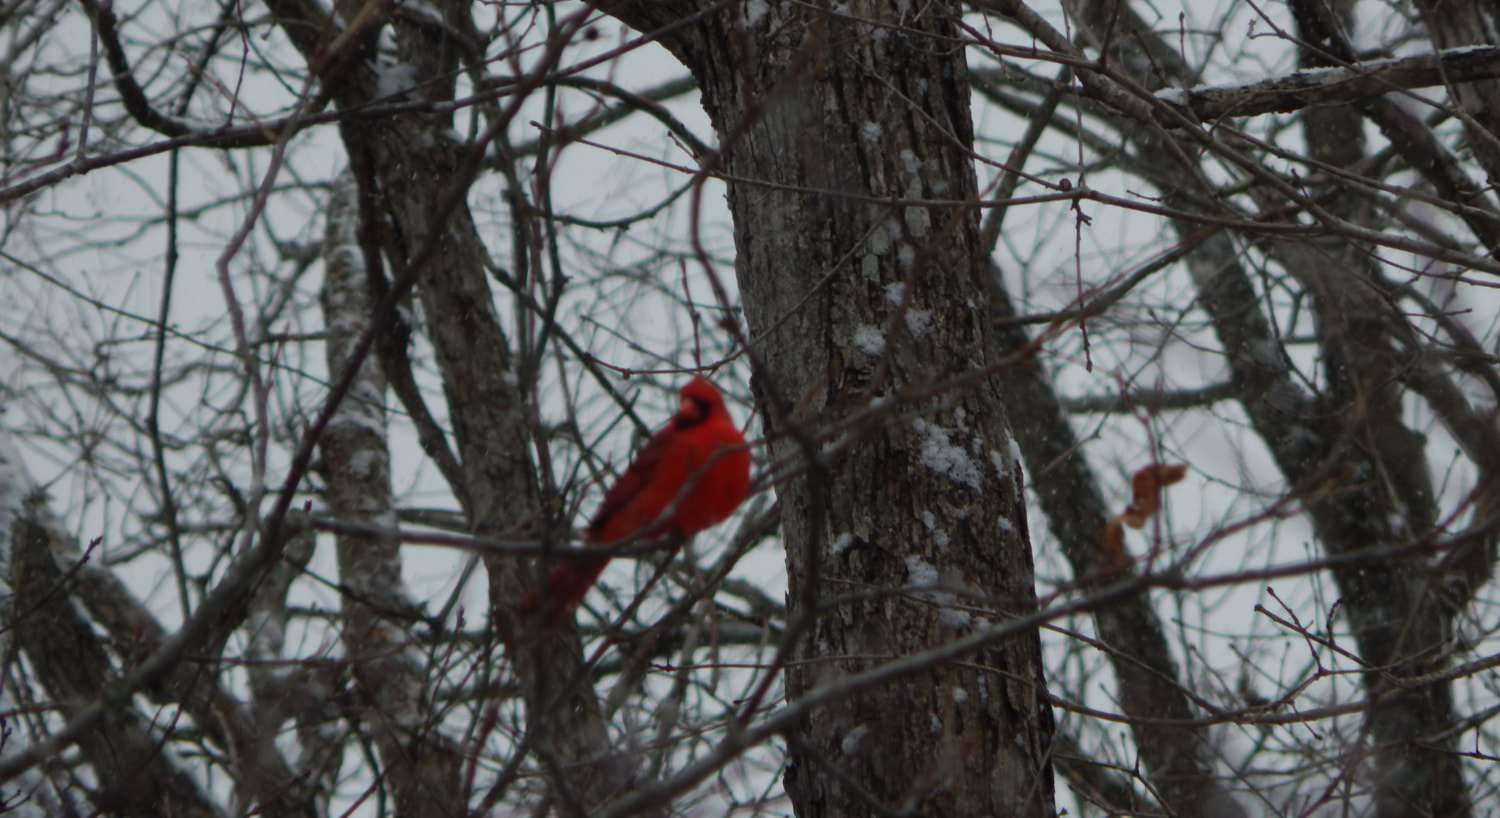 Close up view of a red bird sitting on a branch in a tree during winter